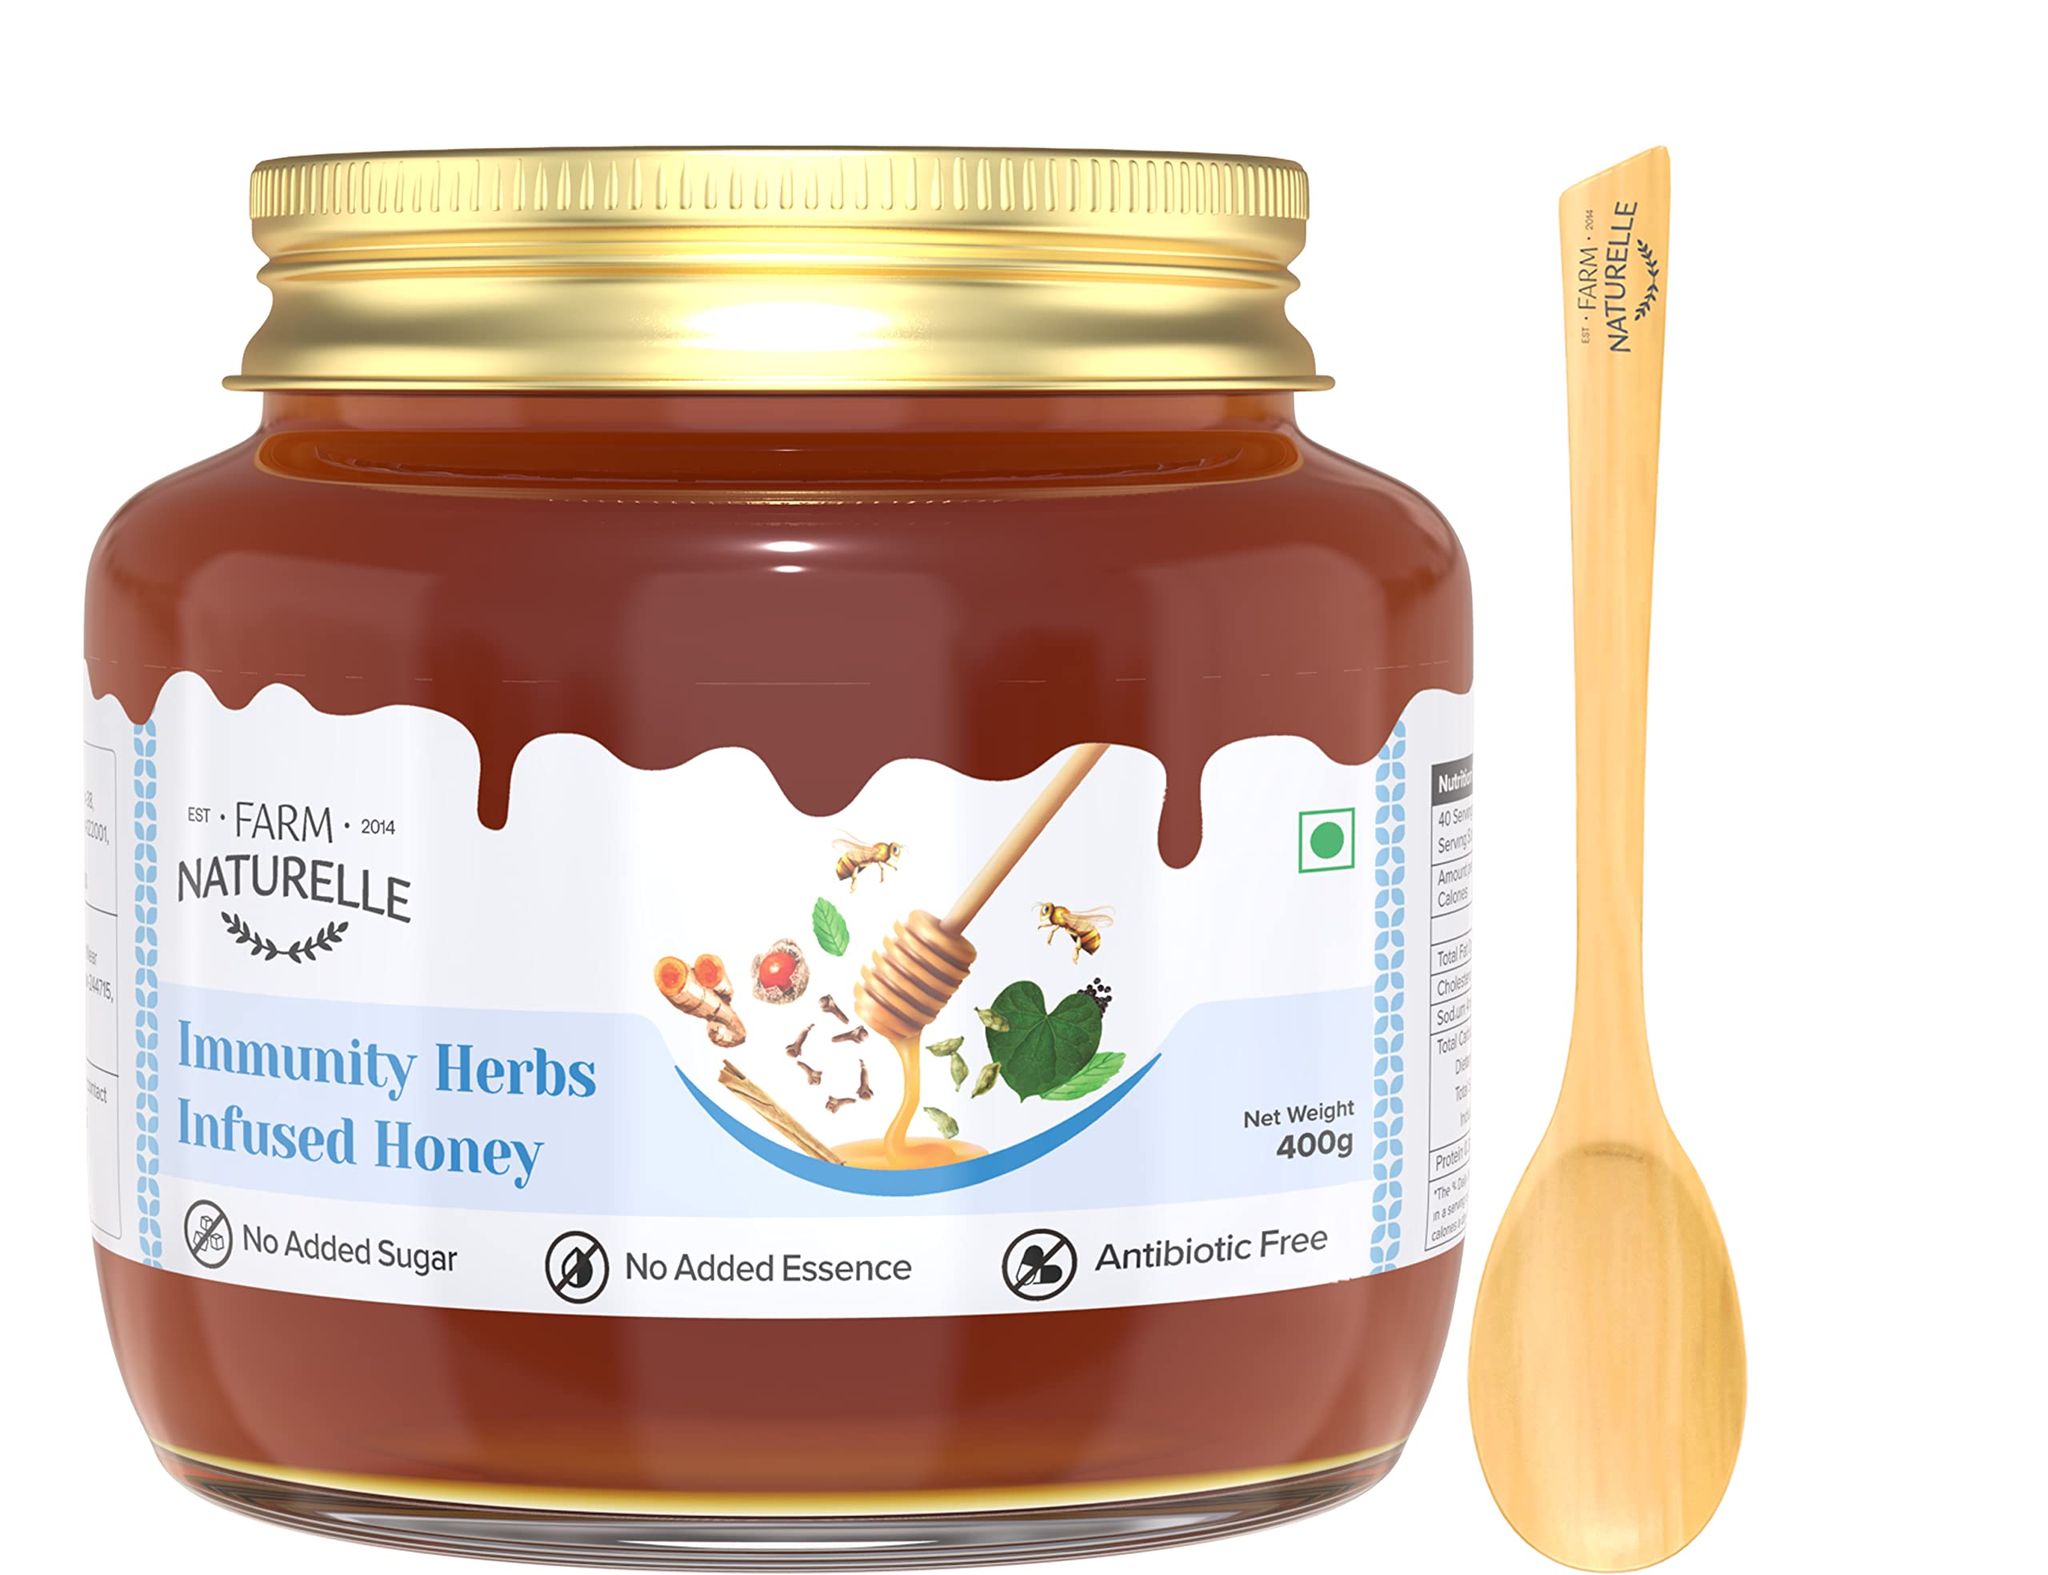 Farm Naturelle-Immunity herbs Infused Flower Wild Forest Honey|400gm and a Wooden Spoon|Pure and Natural| The Finest 100% Raw Natural Unprocessed Honey In Glass Bottle.